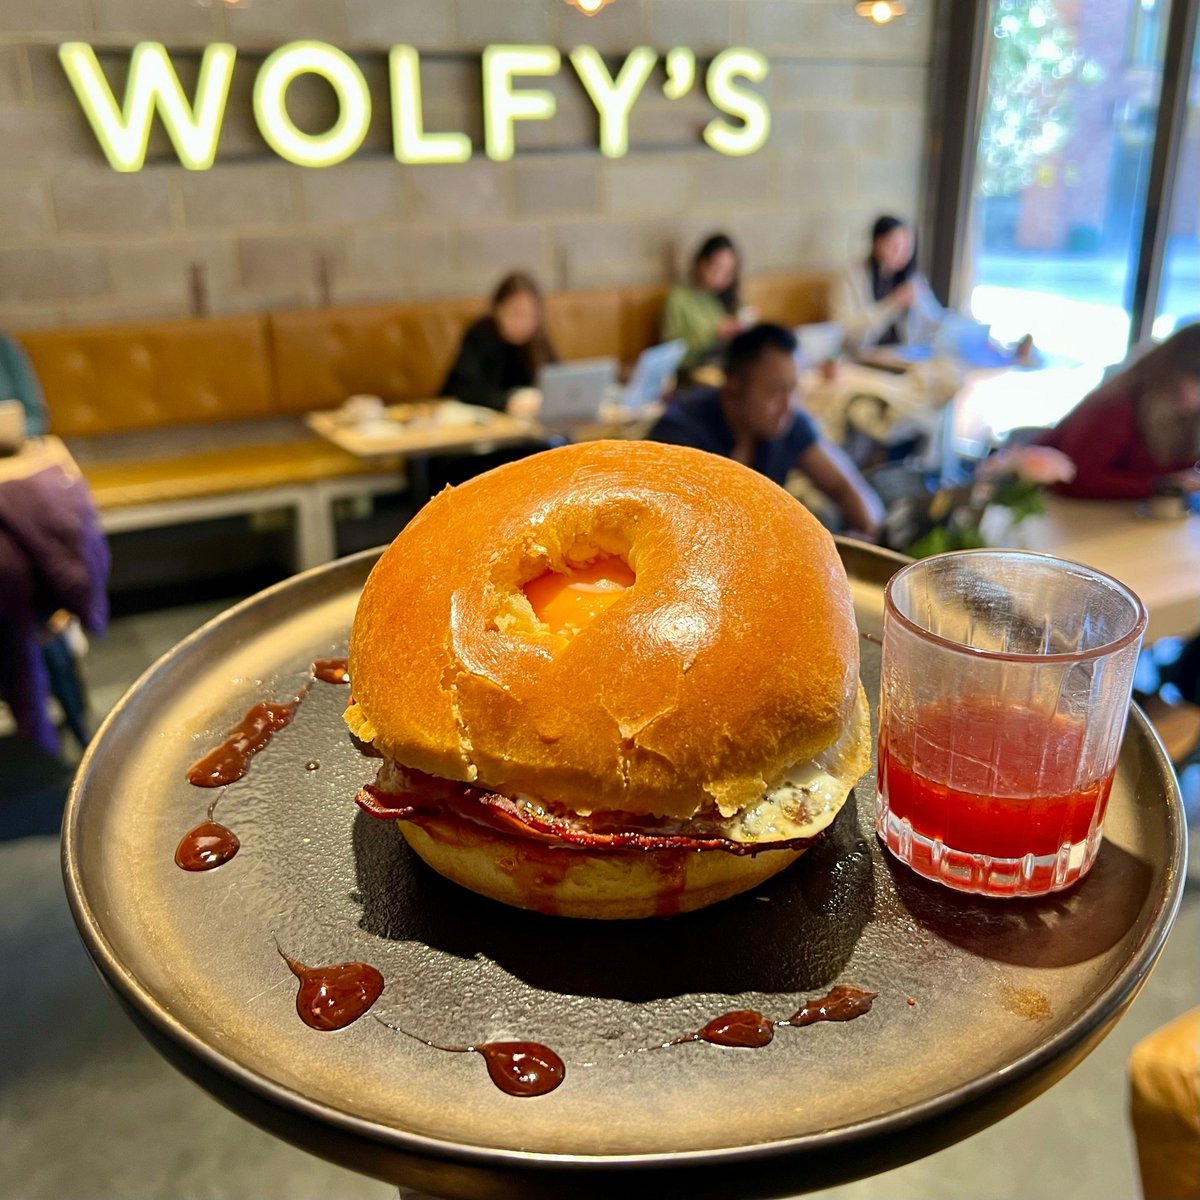 Start your day with a bang at Wolfy's Bar! Our Bacon Bagel 🥯 is the ultimate breakfast treat, topped with creamy avocado and spicy chili jam egg 🍳 Try it now, it's our bestseller! #breakfastgoals #baconbagel #eggsandwich #delicious linktr.ee/wolfysbar